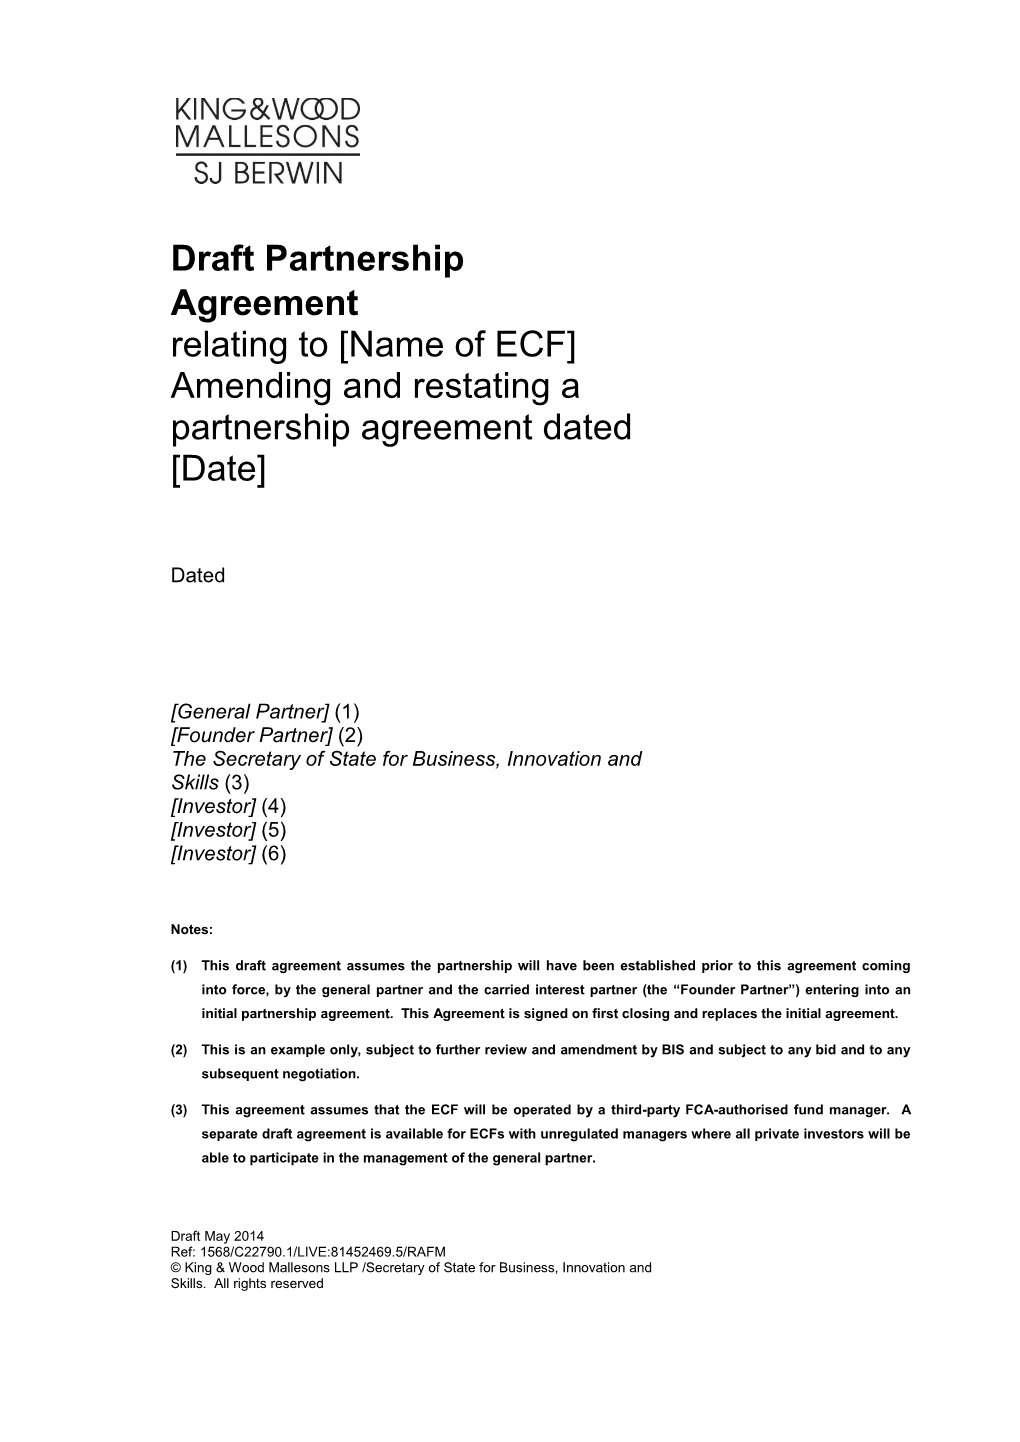 Draft Partnership Agreement Relating to [Name of ECF] Amending and Restating a Partnership Agreement Dated [Date]